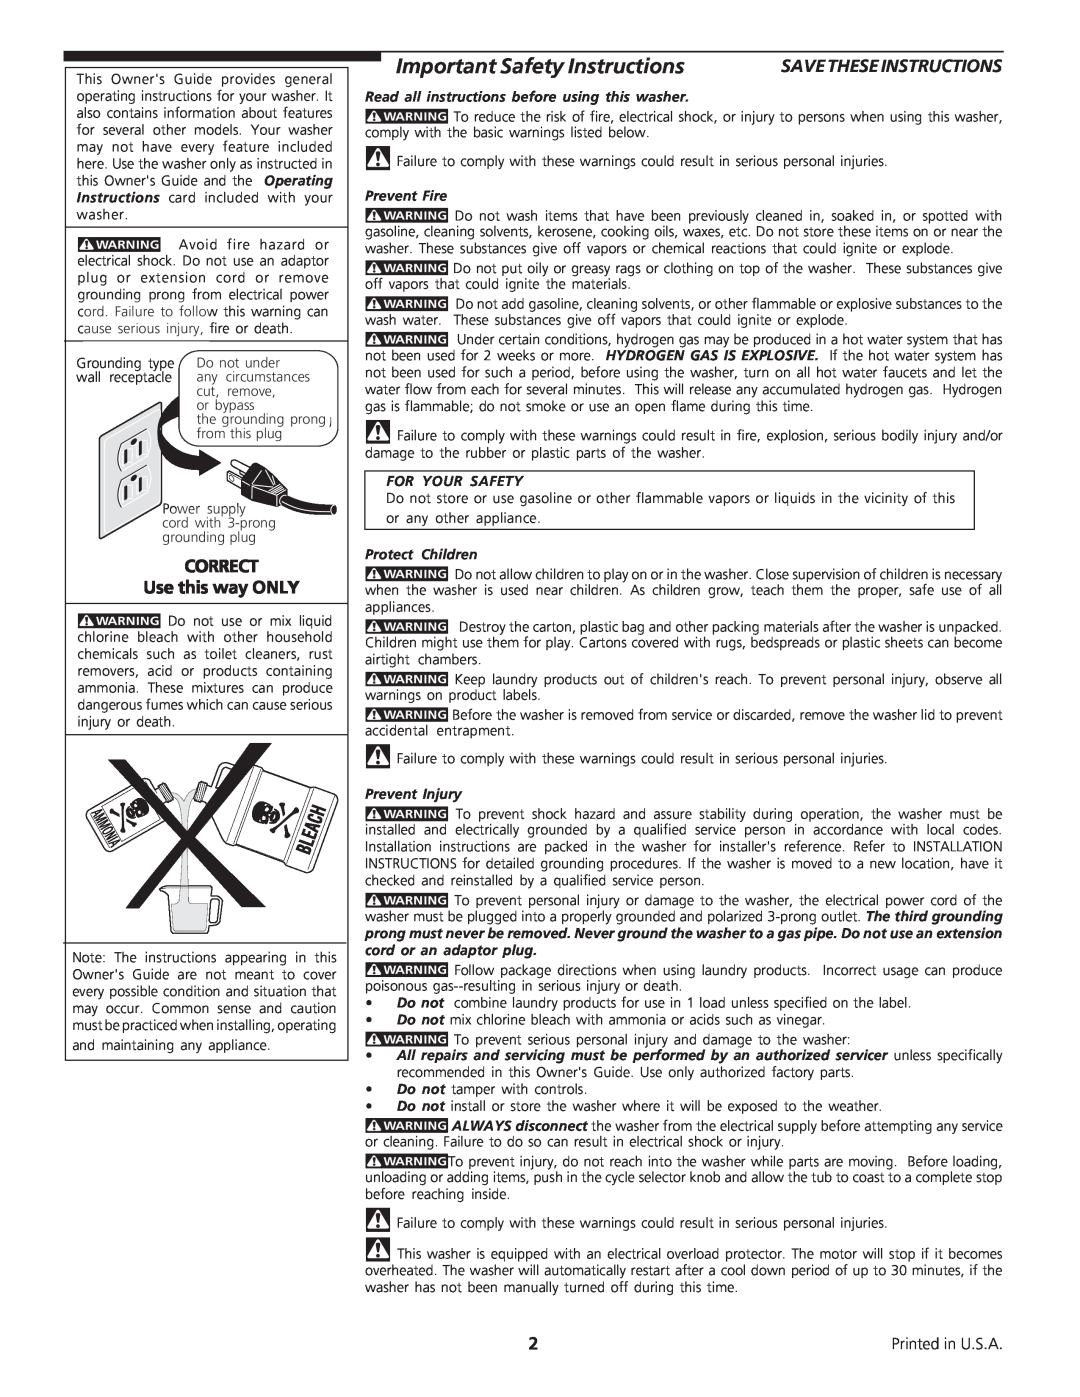 Frigidaire 134670100 Important Safety Instructions, CORRECT Use this way ONLY, Grounding type, Do nott u nder, or by pass 